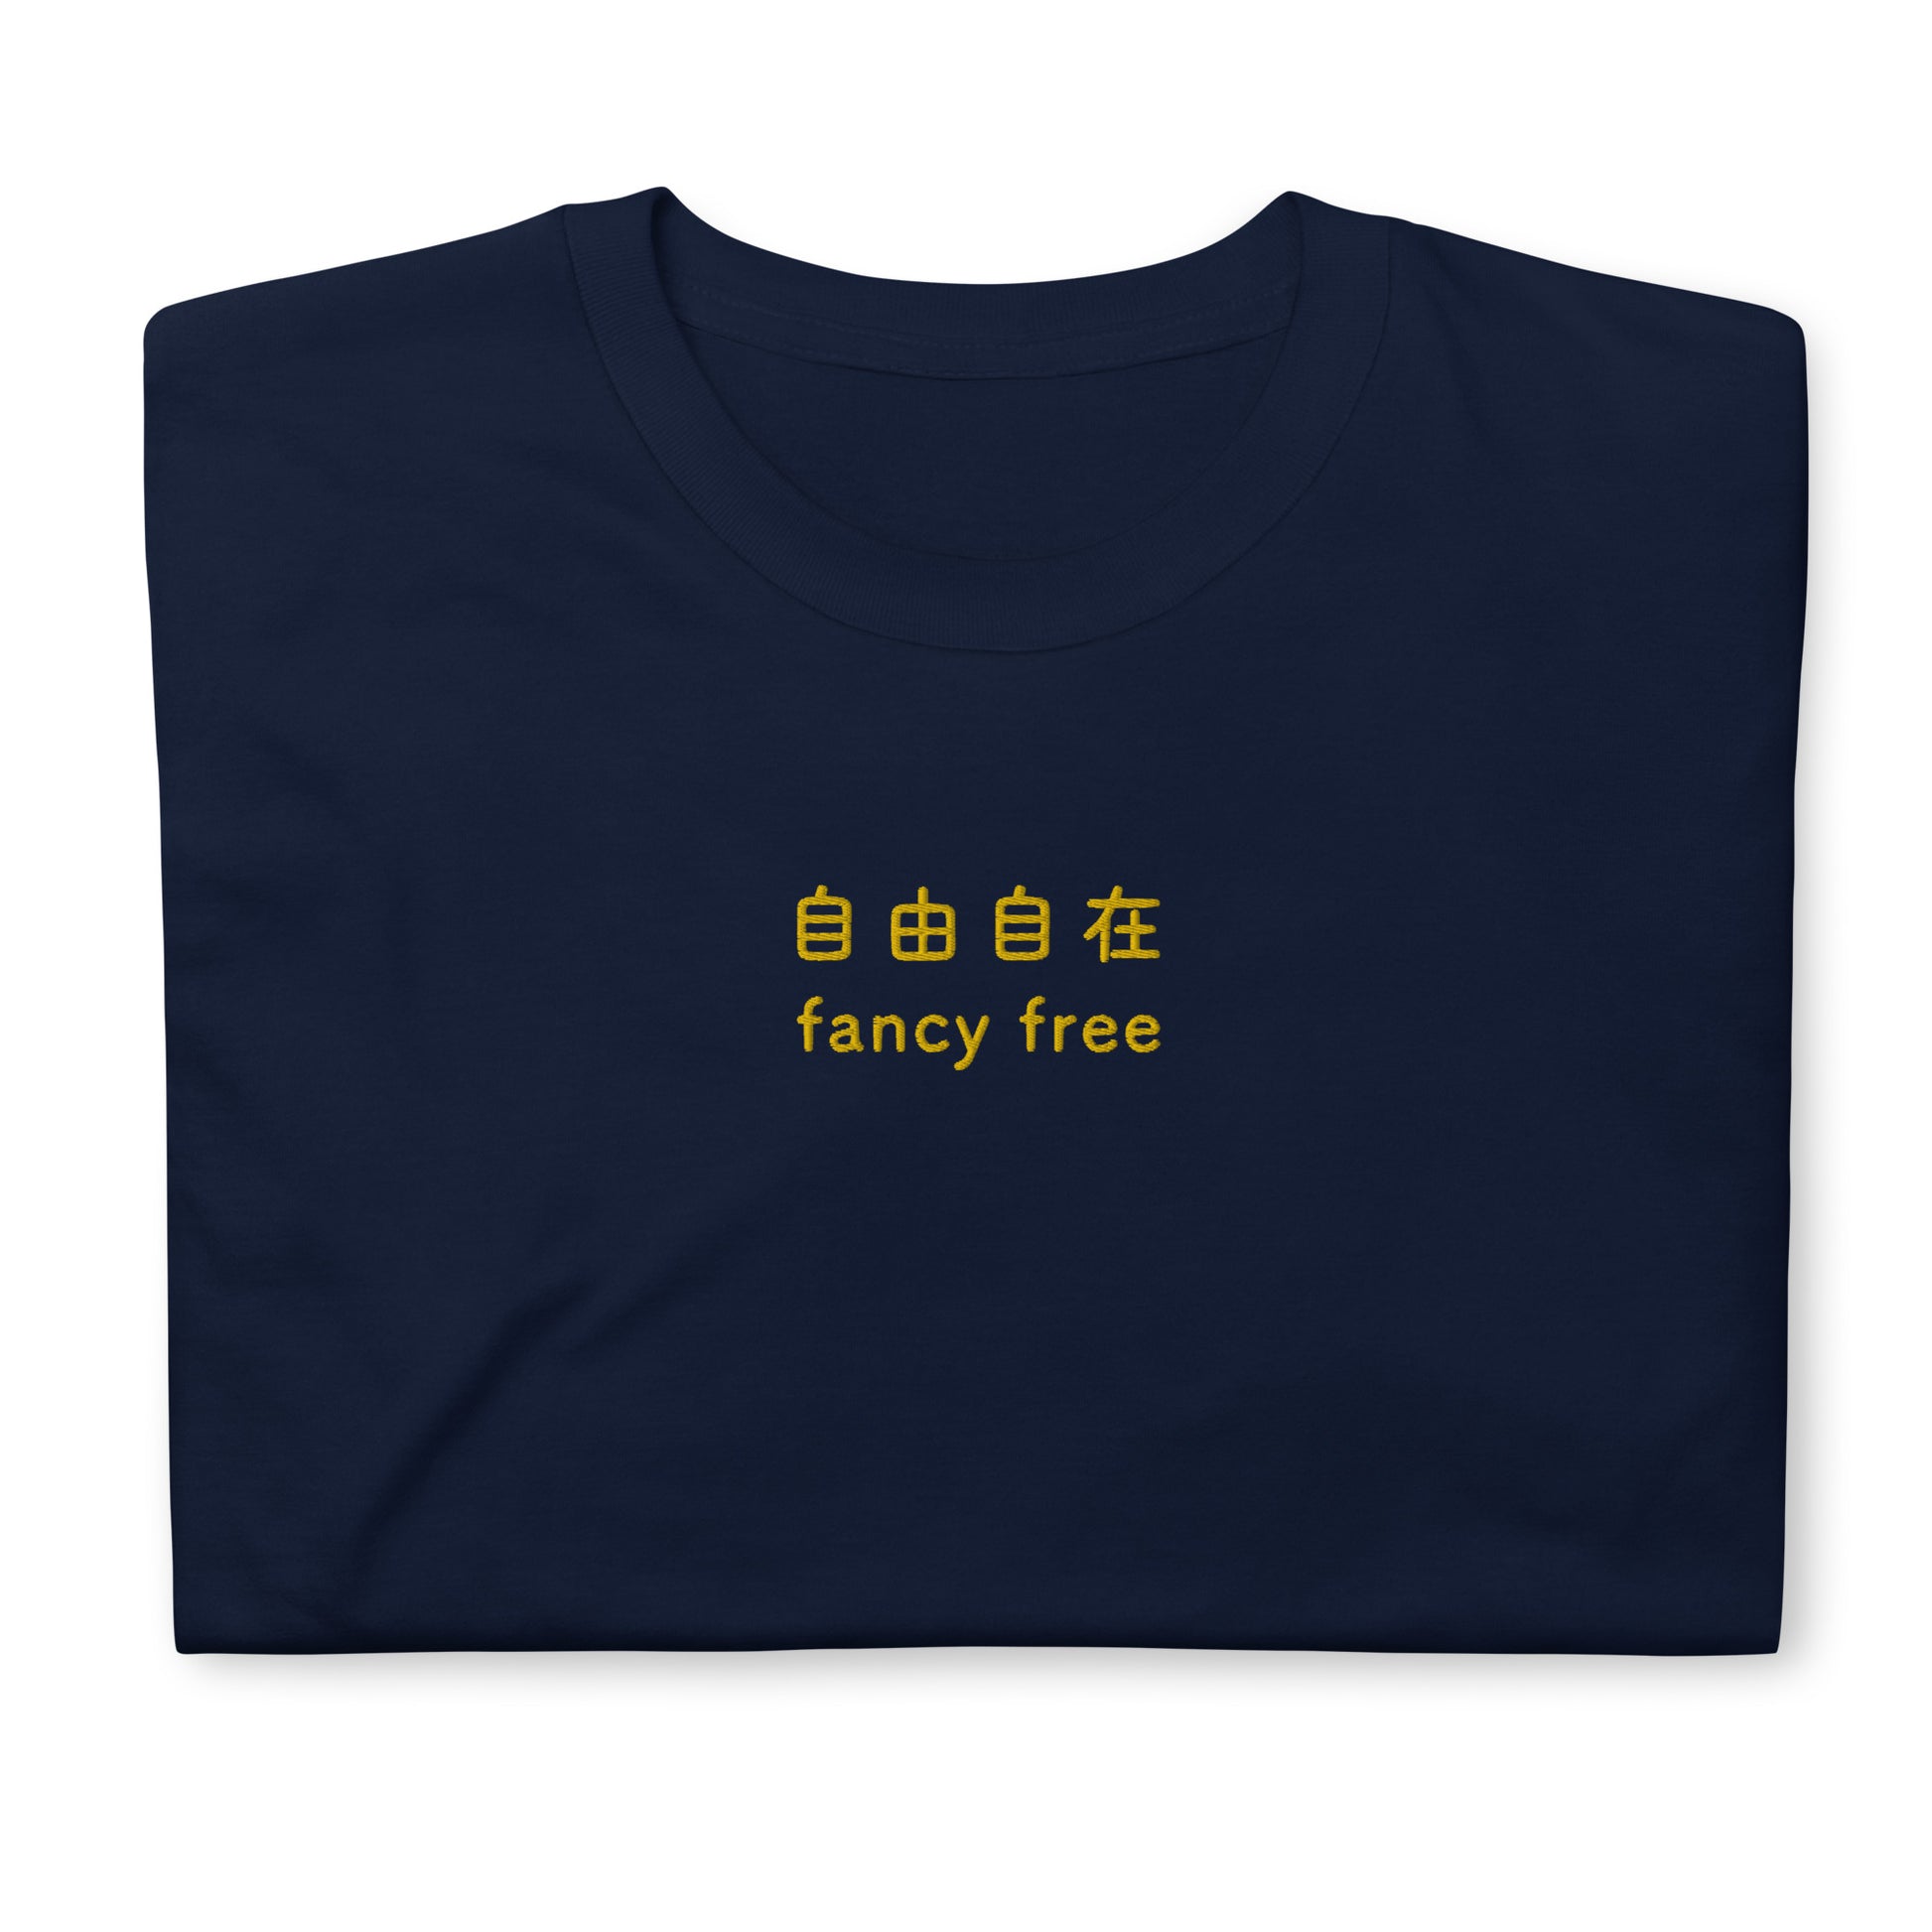 Navy High Quality Tee - Front Design with an Yellow Embroidery "Fancy Free" in Japanese,Chinese and English